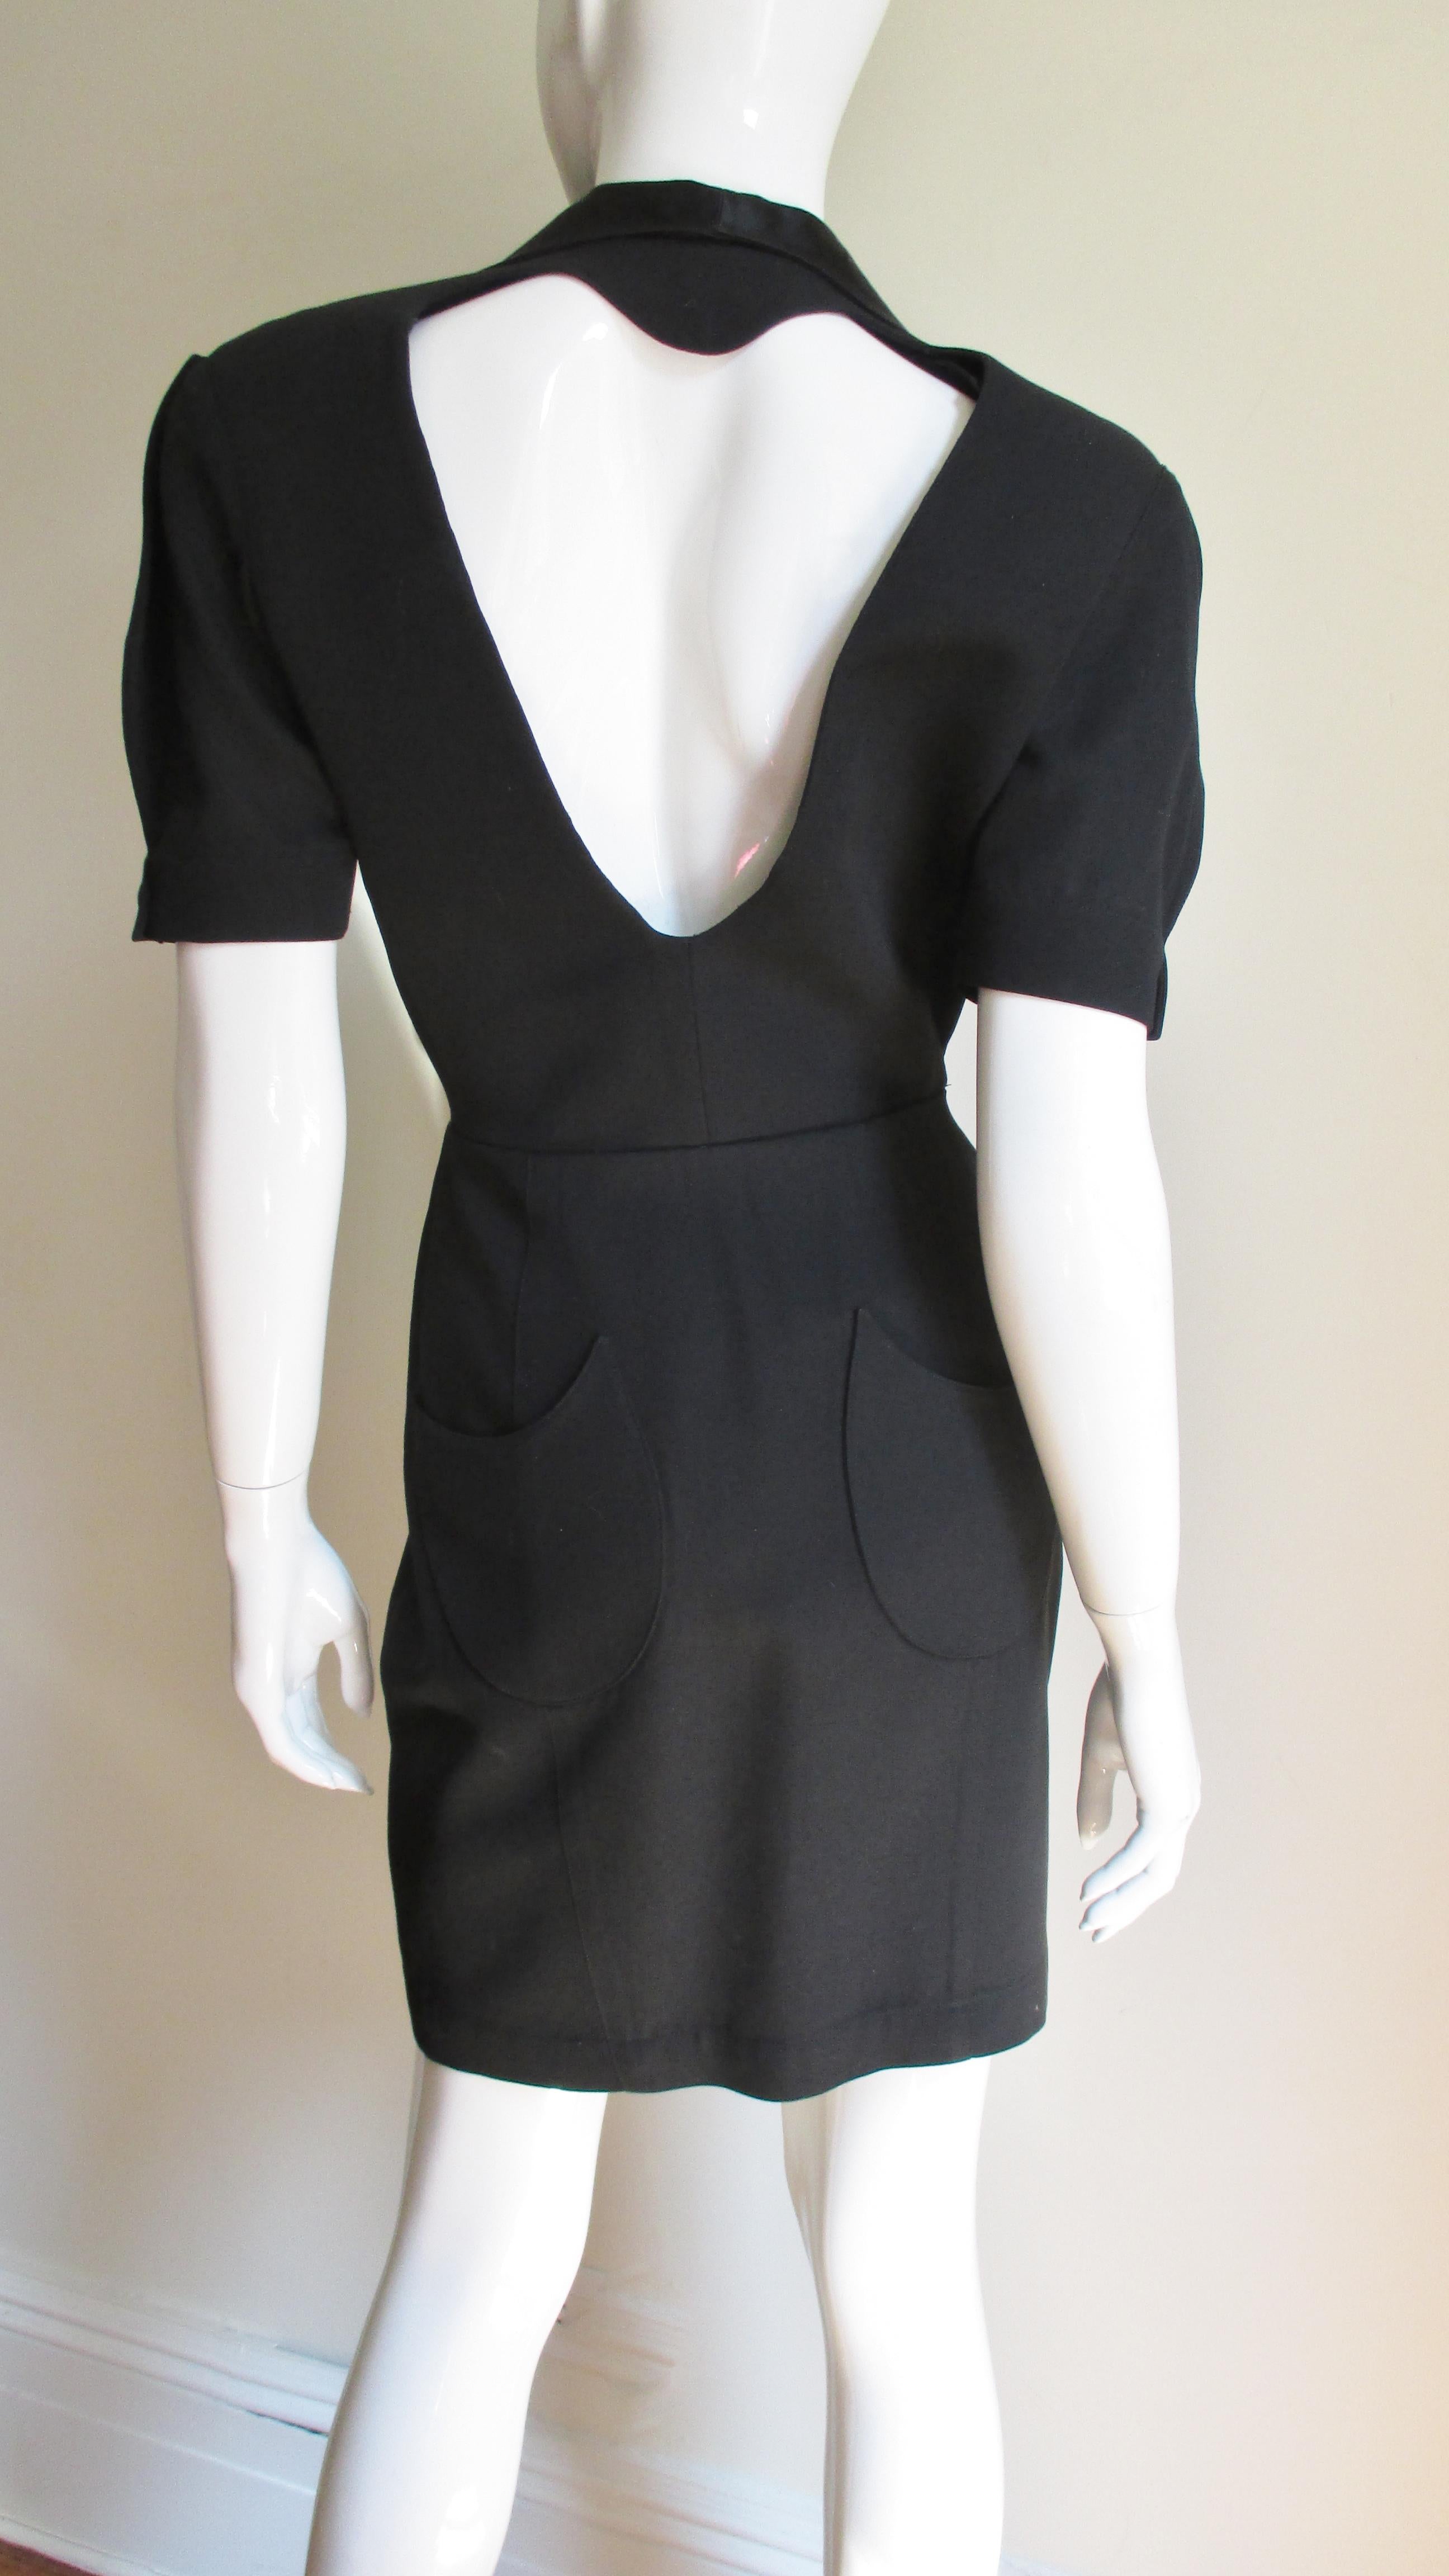 A fabulous dress in light weight black wool dress from Thierry Mugler.  It is gorgeous abstract shaped black silk lapels and short sleeves with snap cuffs.  It has a double breasted snap front closure with a straight skirt and 2 backside patch